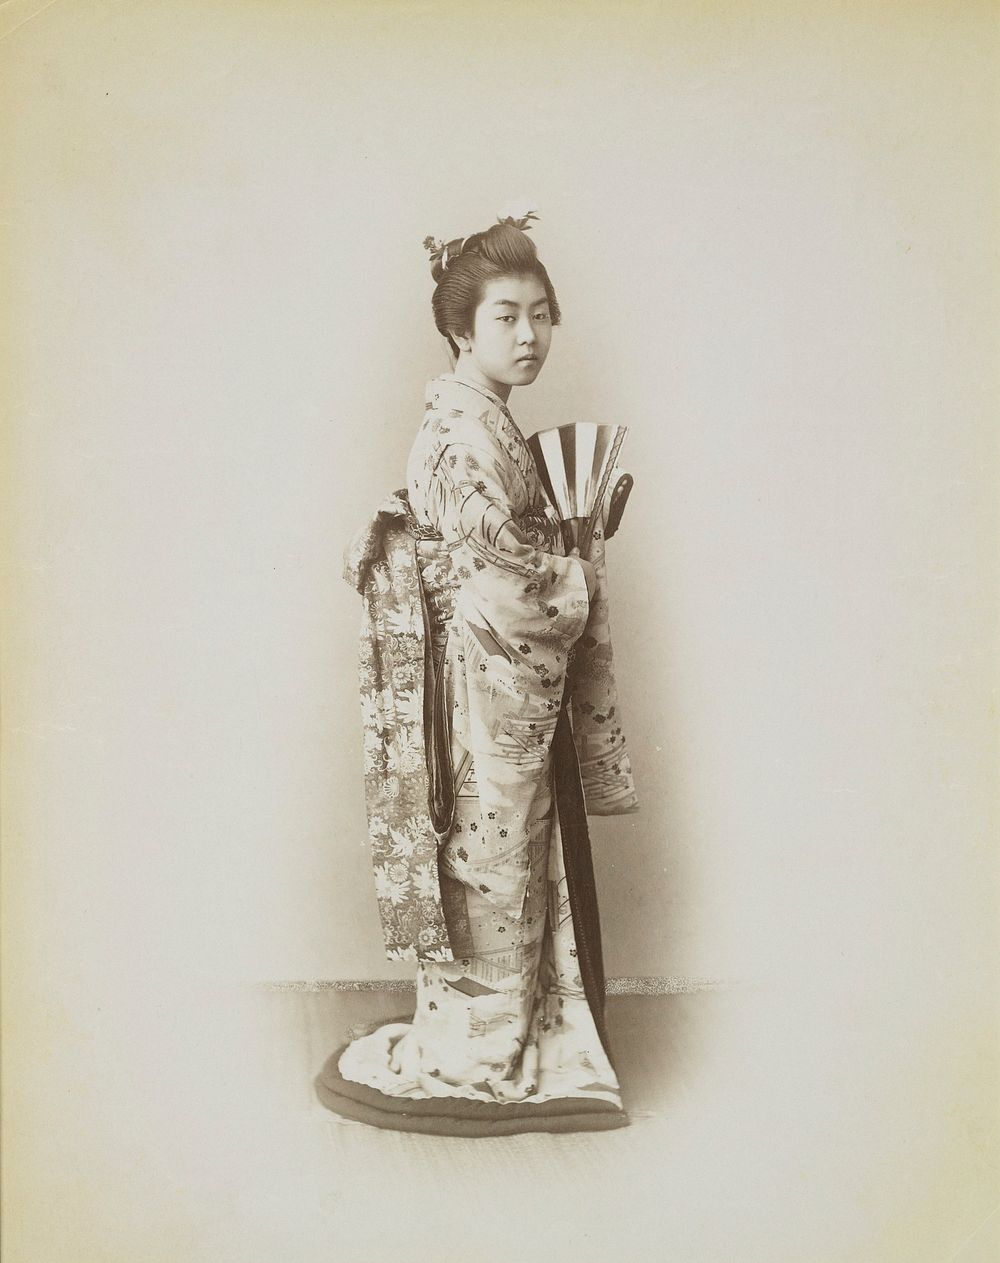 portrait of a standing girl wearing a patterned kimono with flowers and buildings and an obi with flowers, holding a striped…